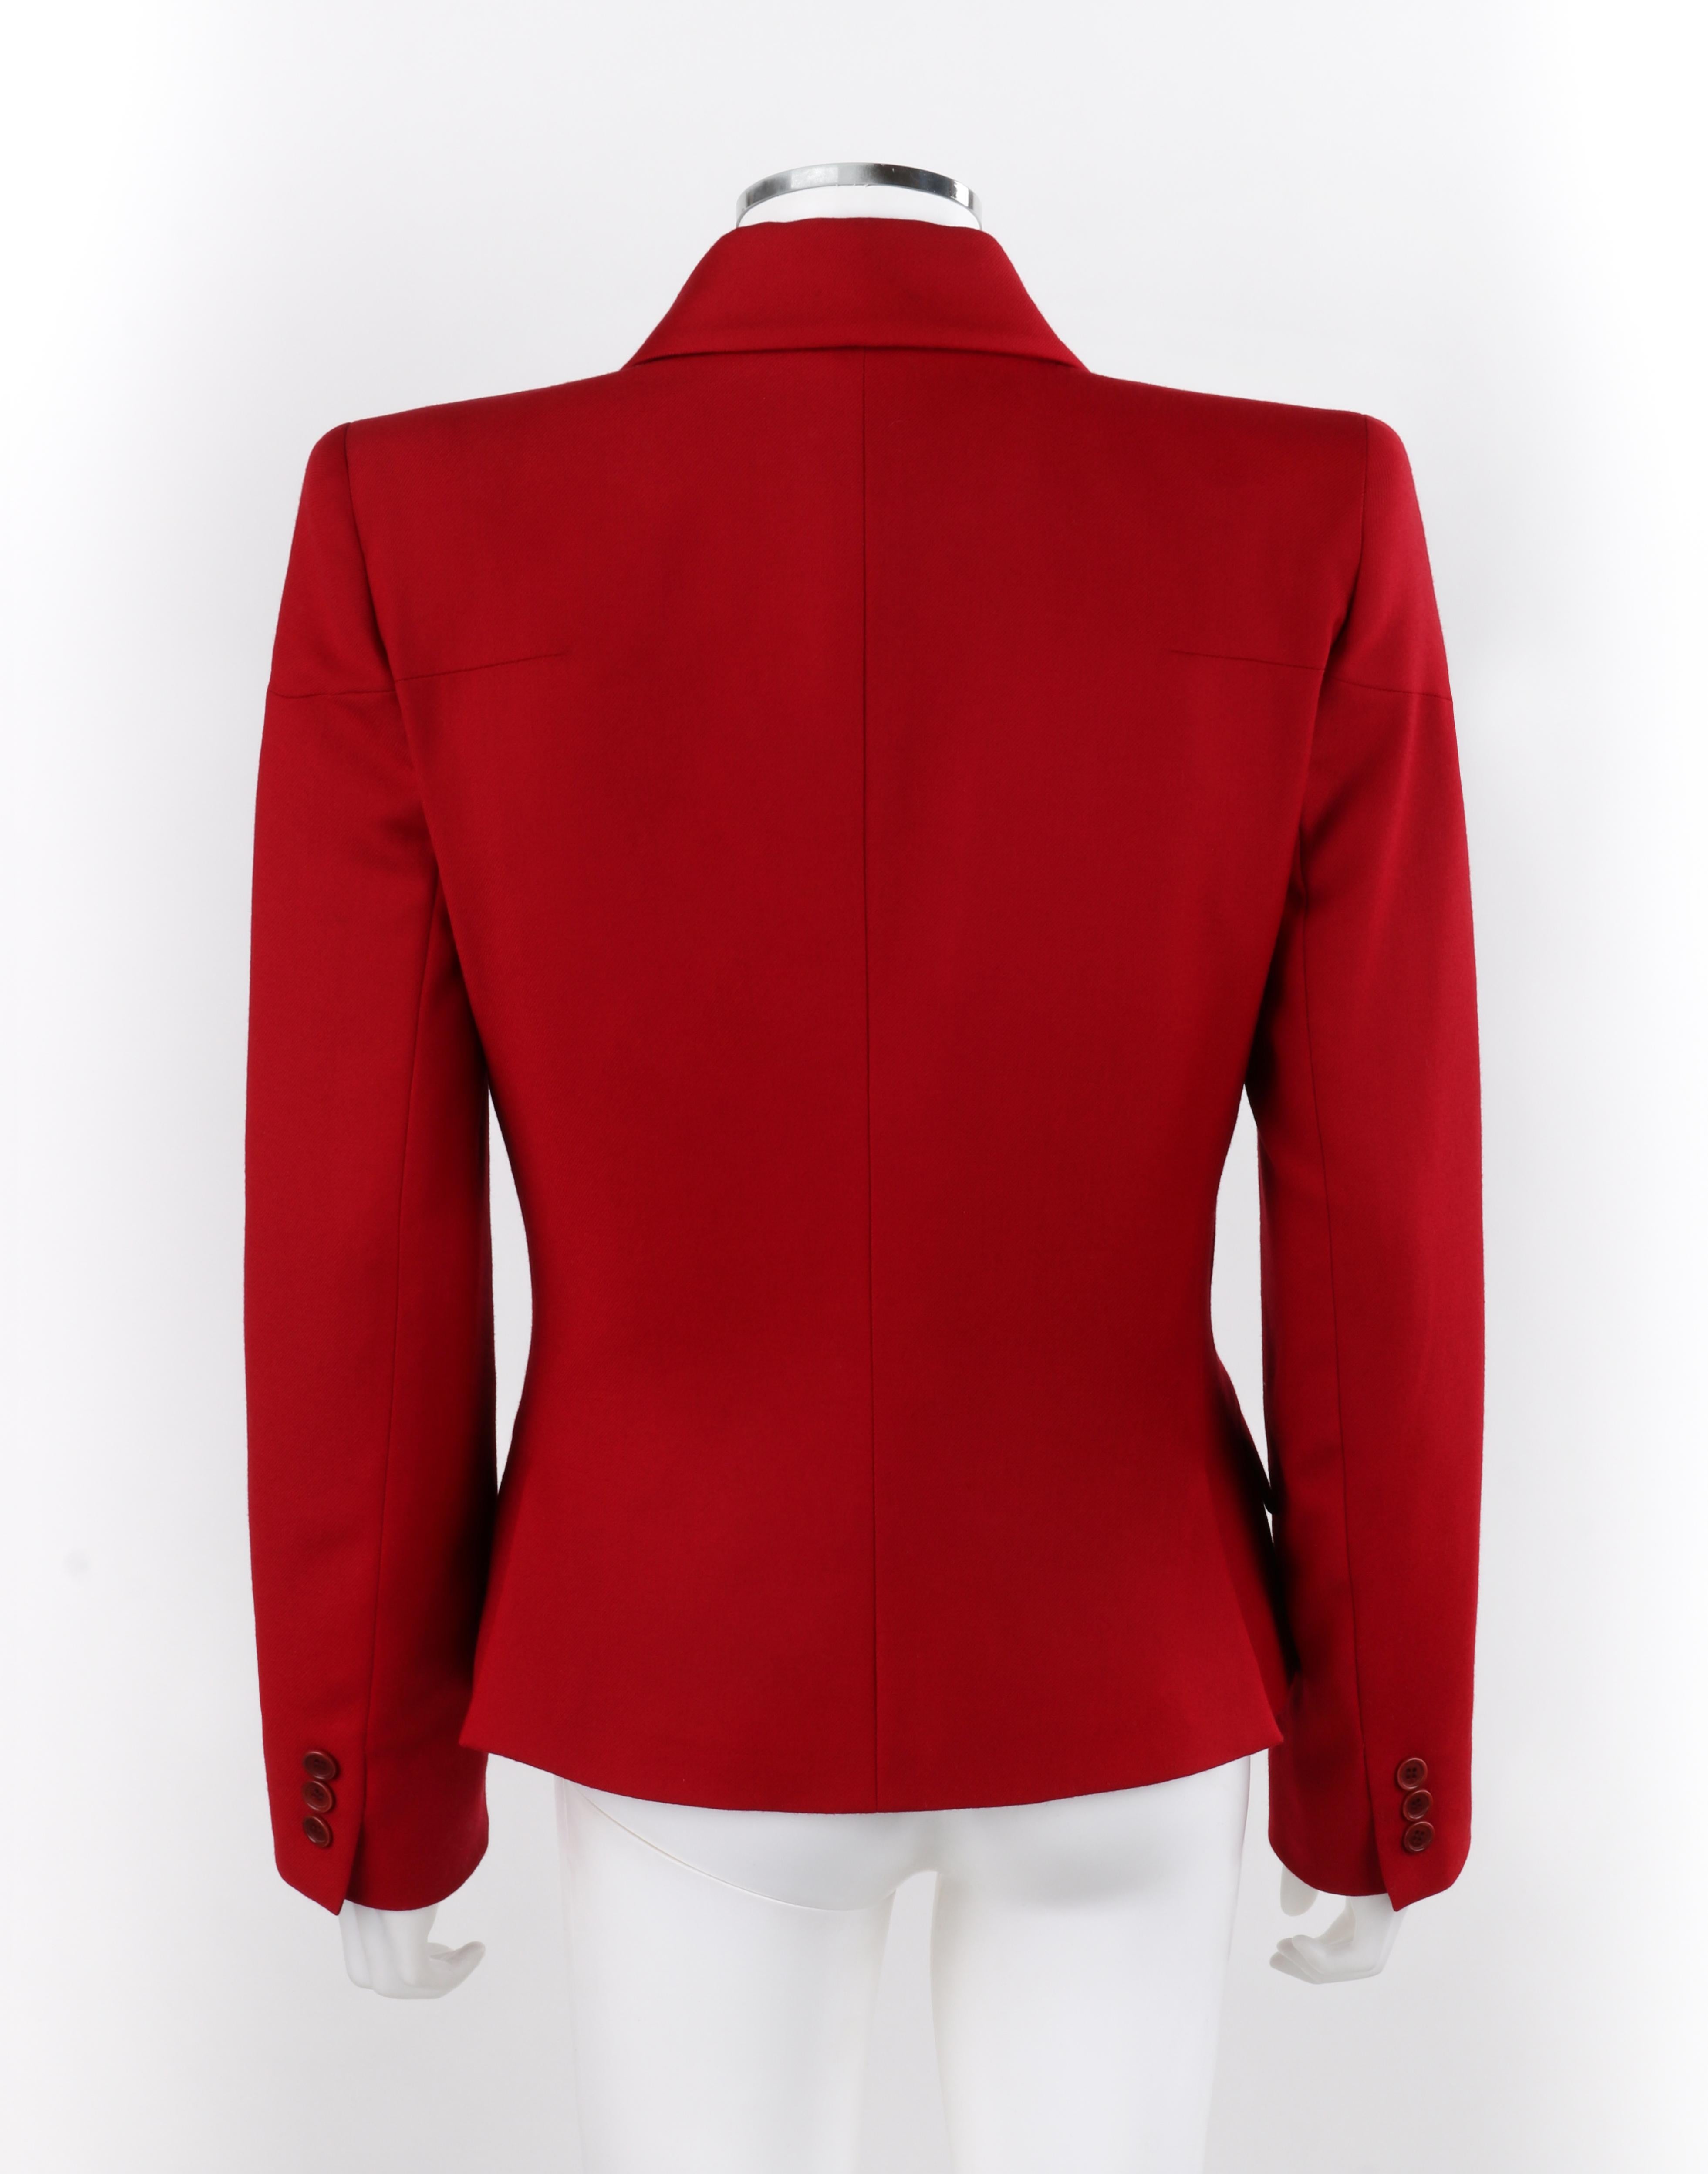 Women's ALEXANDER McQUEEN A/W 1998 “Joan” Red Double Breasted Button Front Blazer Jacket For Sale